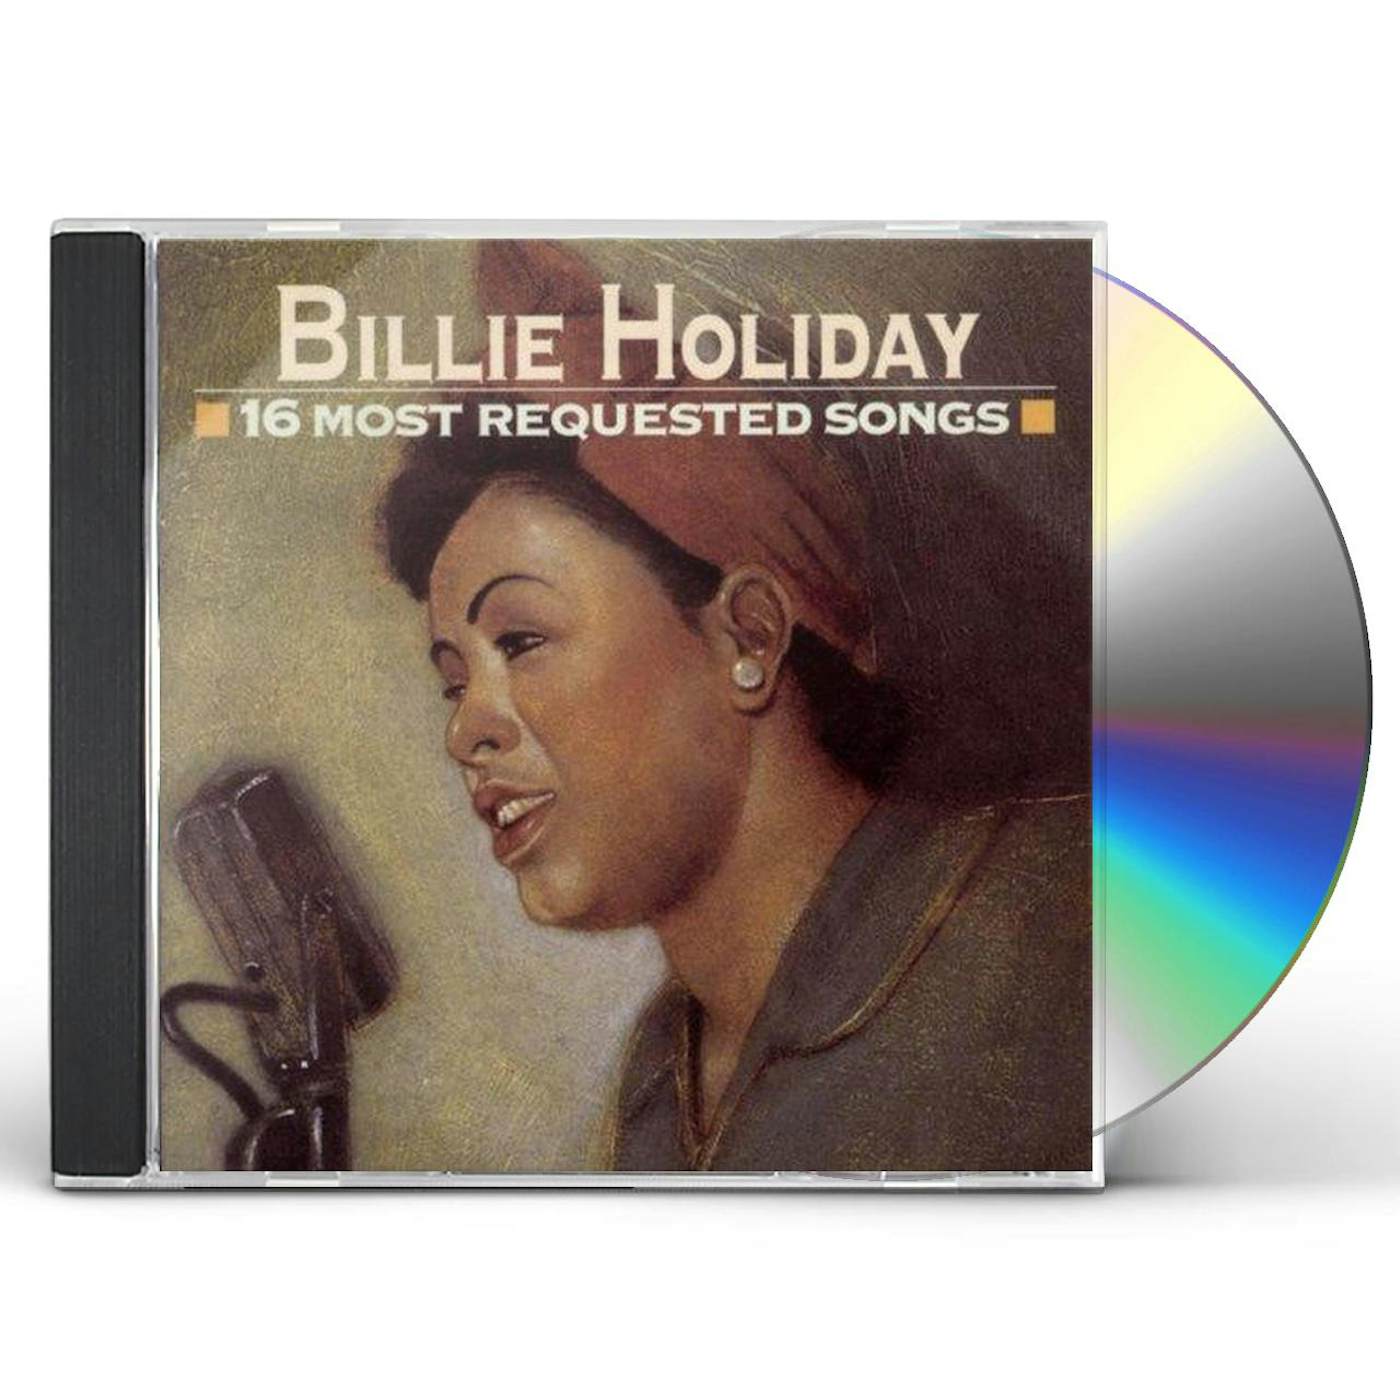 Billie Holiday 16 MOST REQUESTED SONGS CD